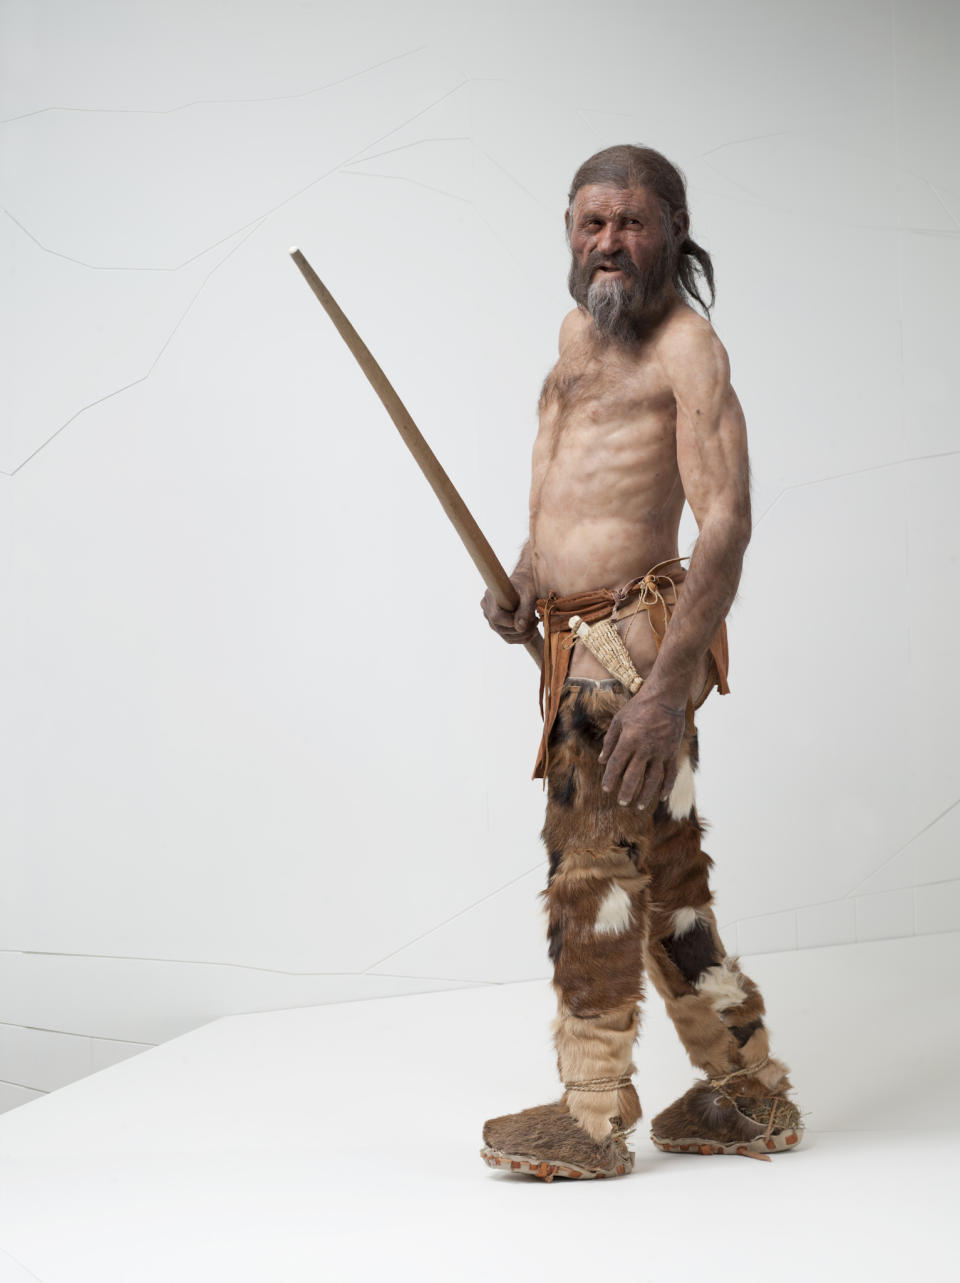 This photo provided by the South Tyrol Museum of Archaeology shows a reconstruction of "Oetzi the Iceman" sculpted by Alfons & Adrie Kennis. Decades after he was discovered in the Italian Alps, scientists determined that Oetzi was mostly descended from farmers from present day Turkey, and his head was balder and skin darker than what was initially thought, according to a study published Wednesday, Aug. 16, 2023, in the journal Cell Genomics. (South Tyrol Museum of Archaeology/Ochsenreiter via AP)